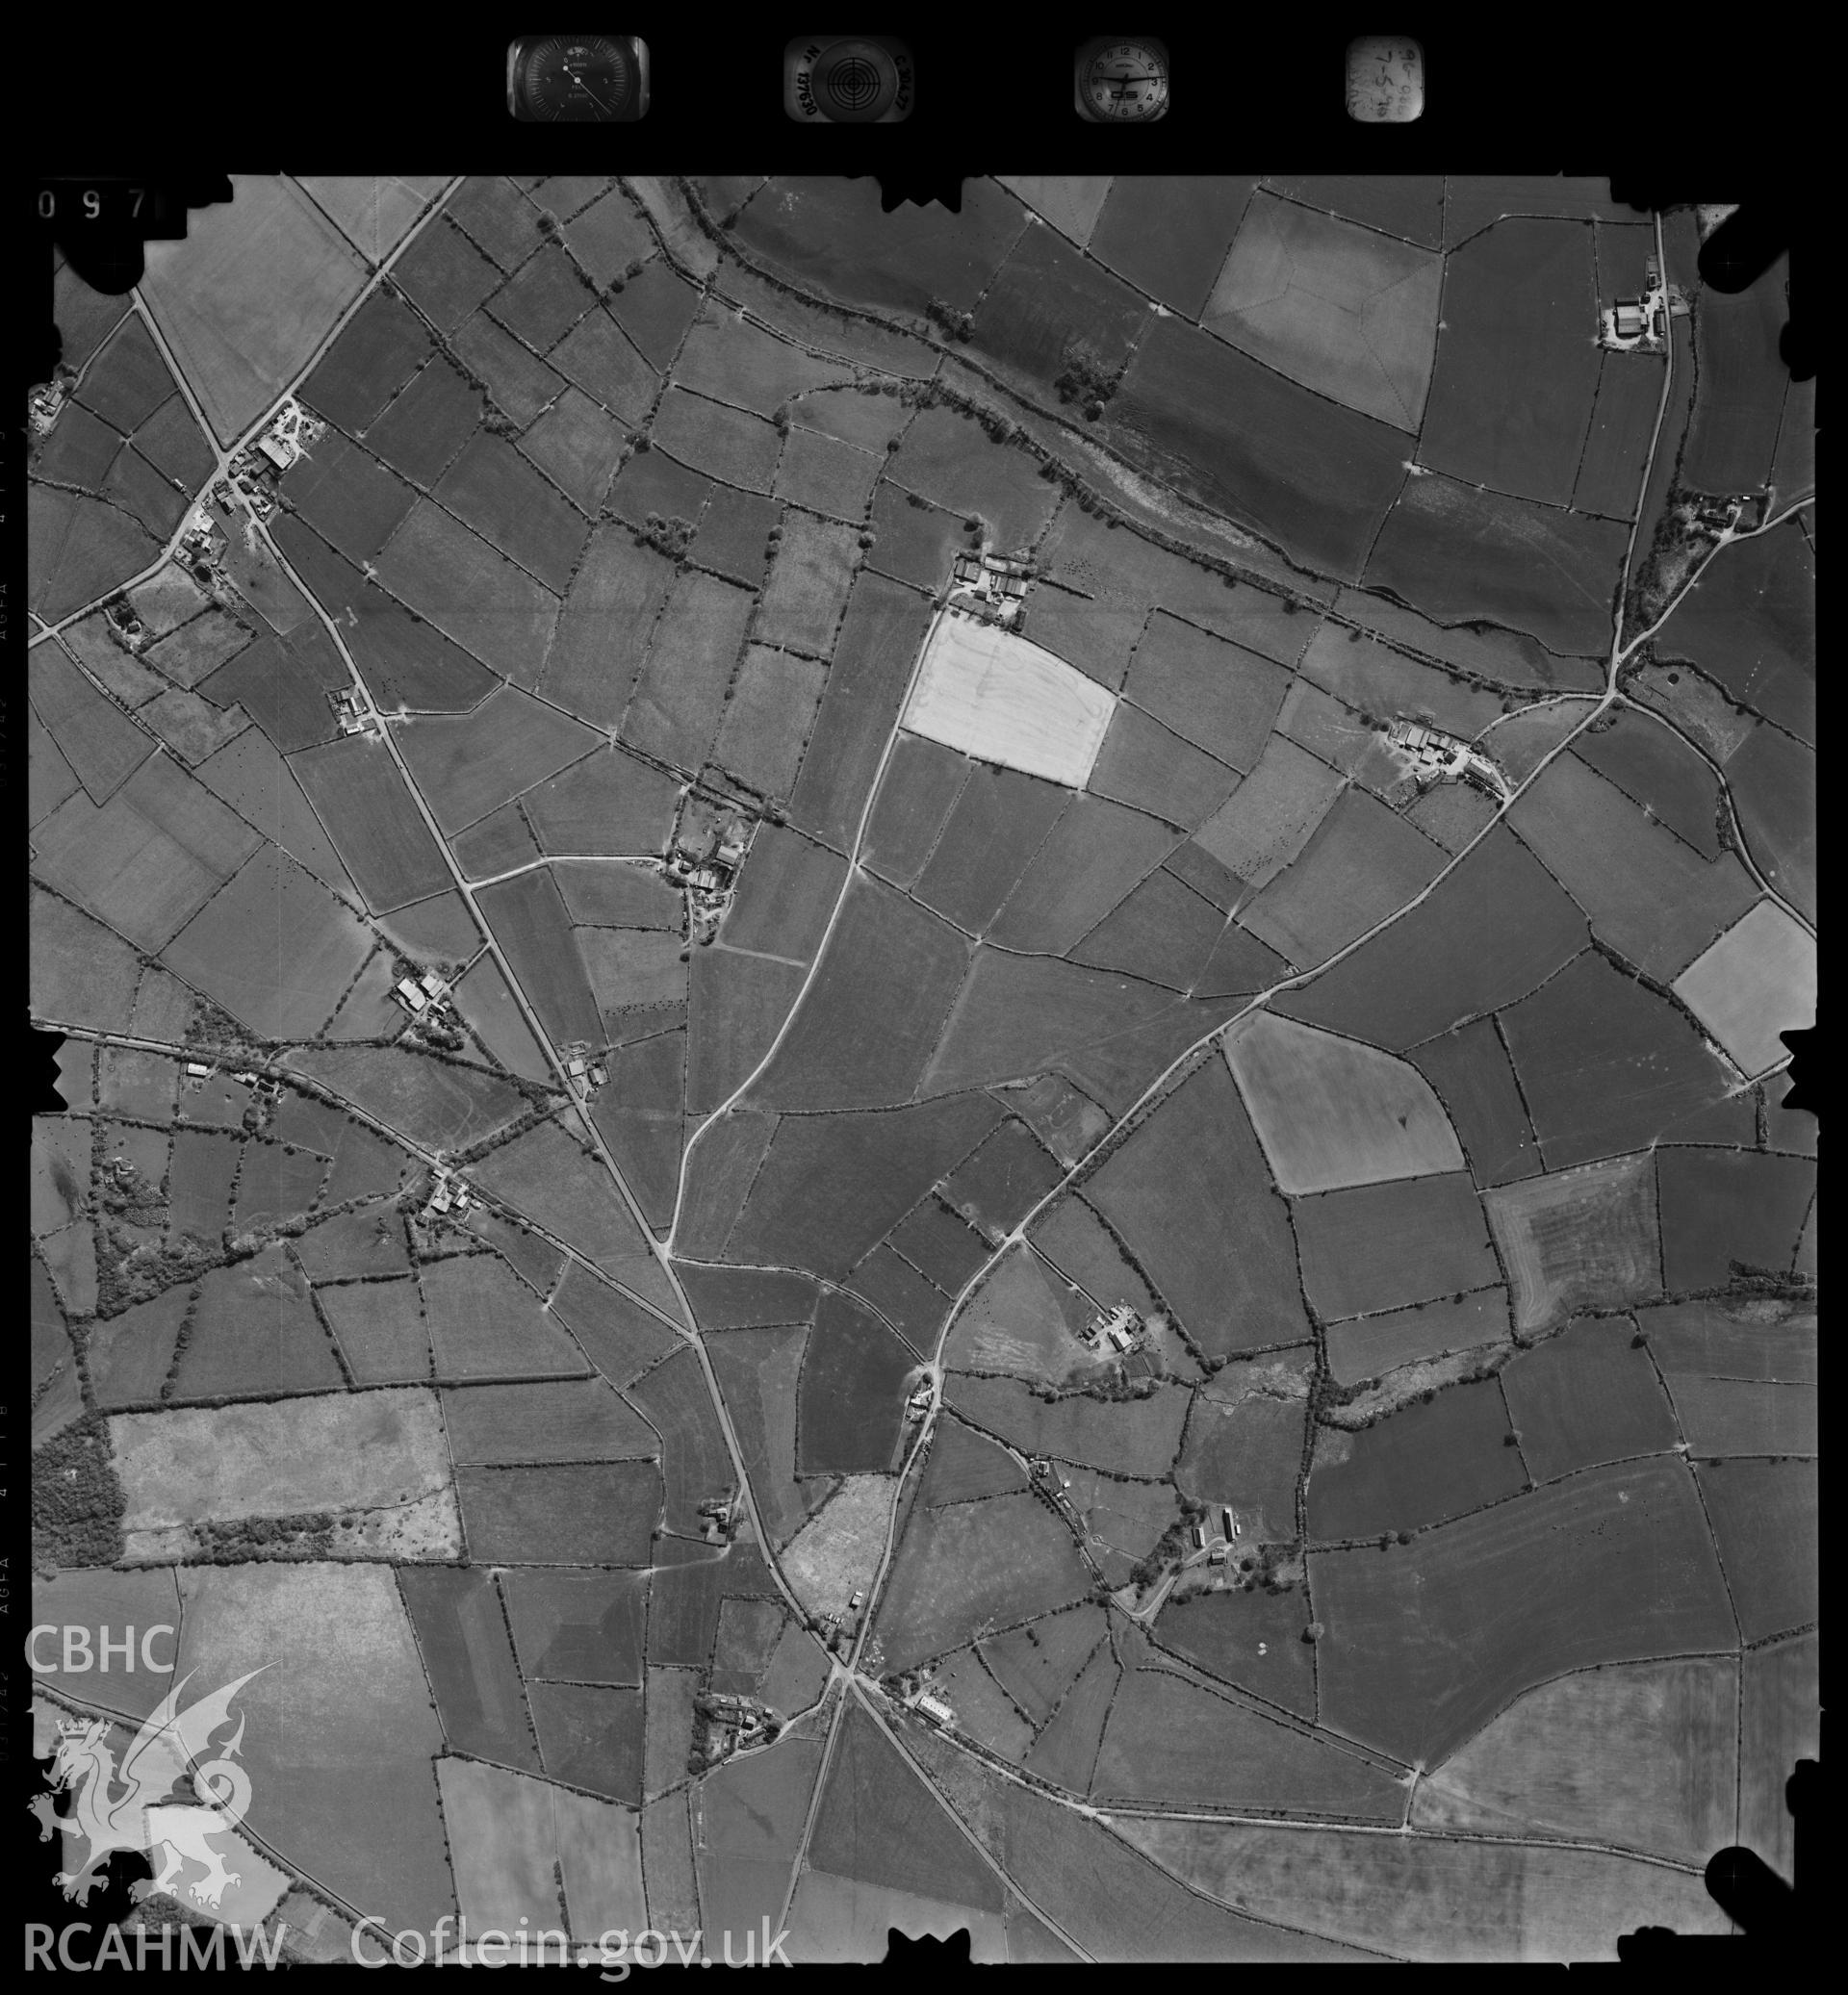 Digitized copy of an aerial photograph showing the area around Clydau, Pembrokeshire, taken by Ordnance Survey, 1996